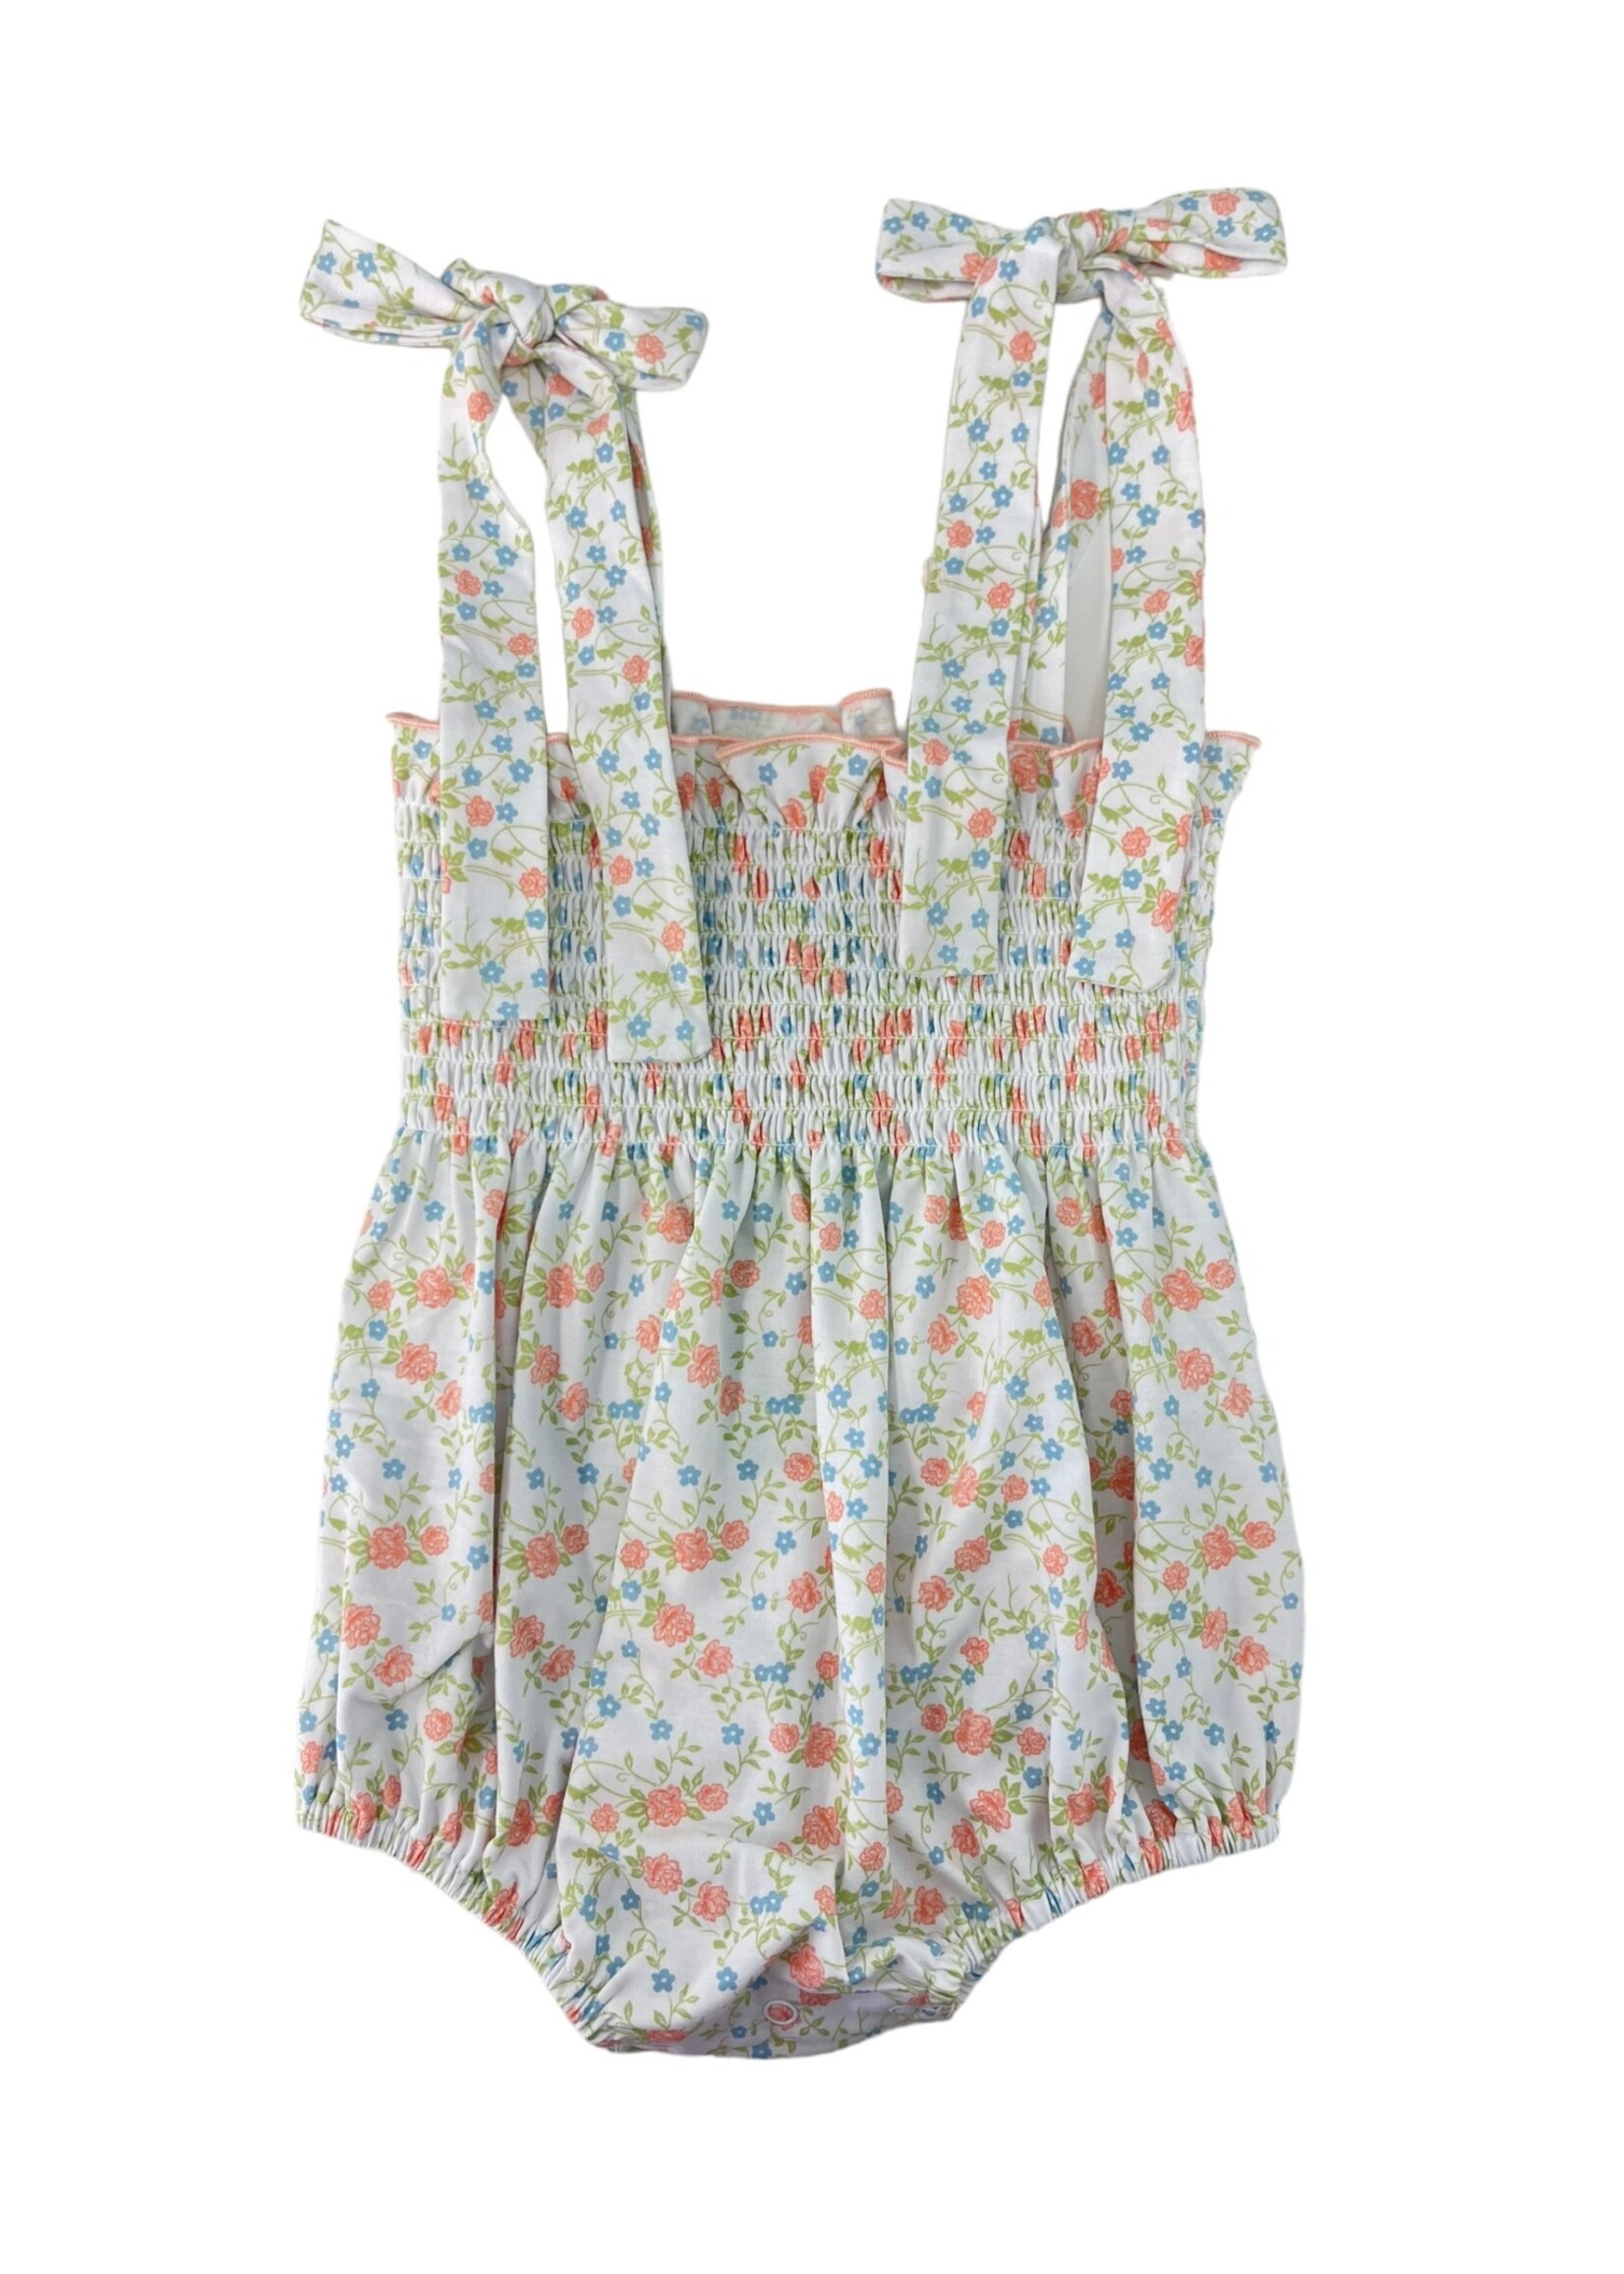 Sage & Lily Peach Floral Smocked Tie Bubble